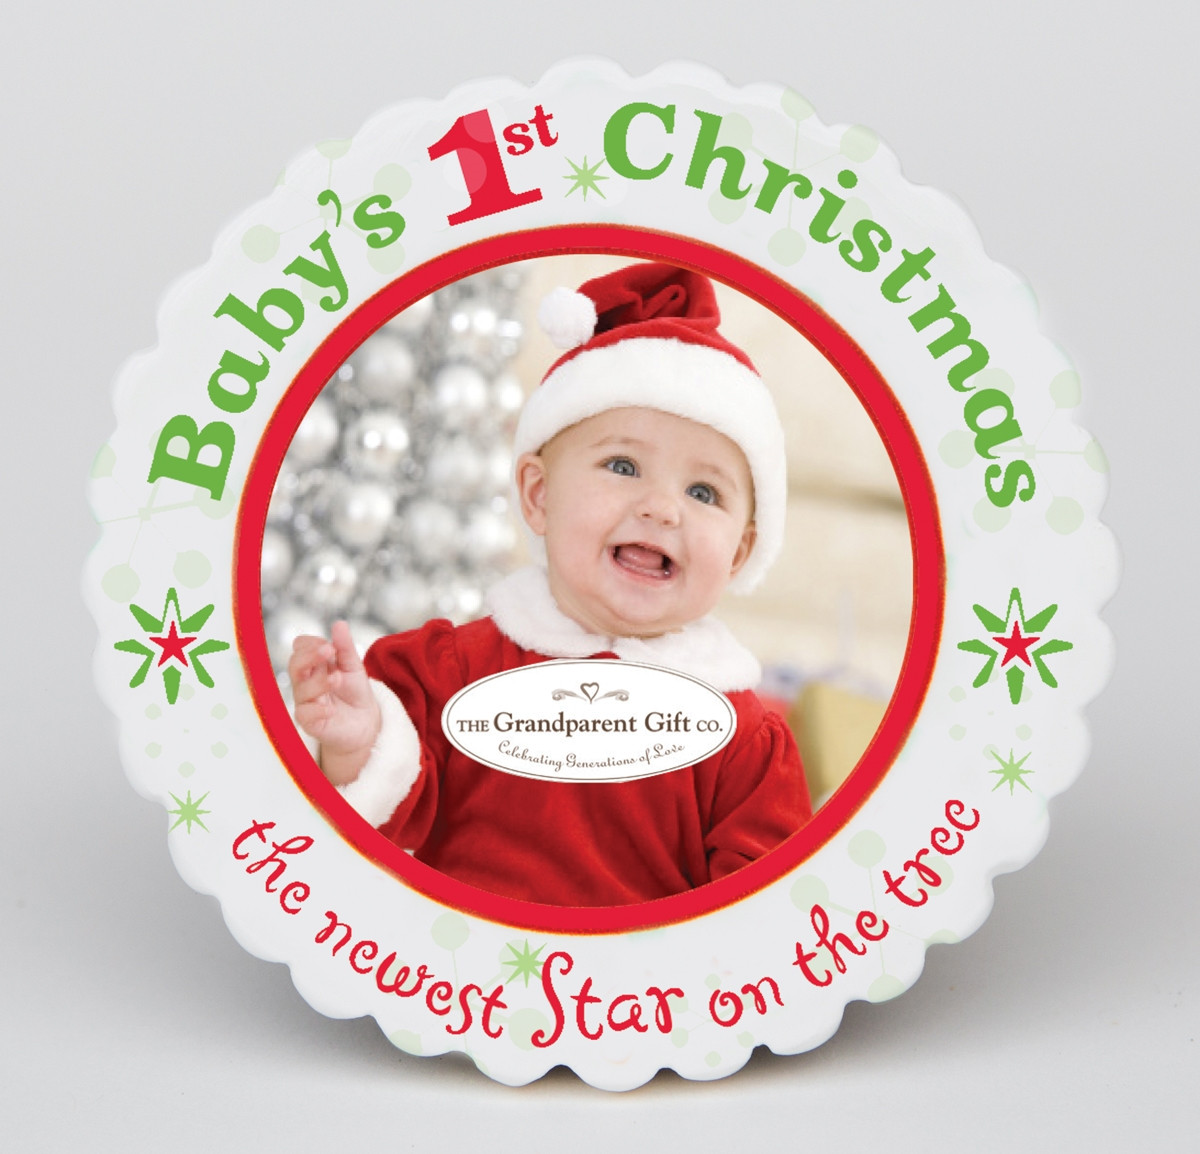 Babys First Christmas Gift Ideas
 Baby s First Christmas Ornament